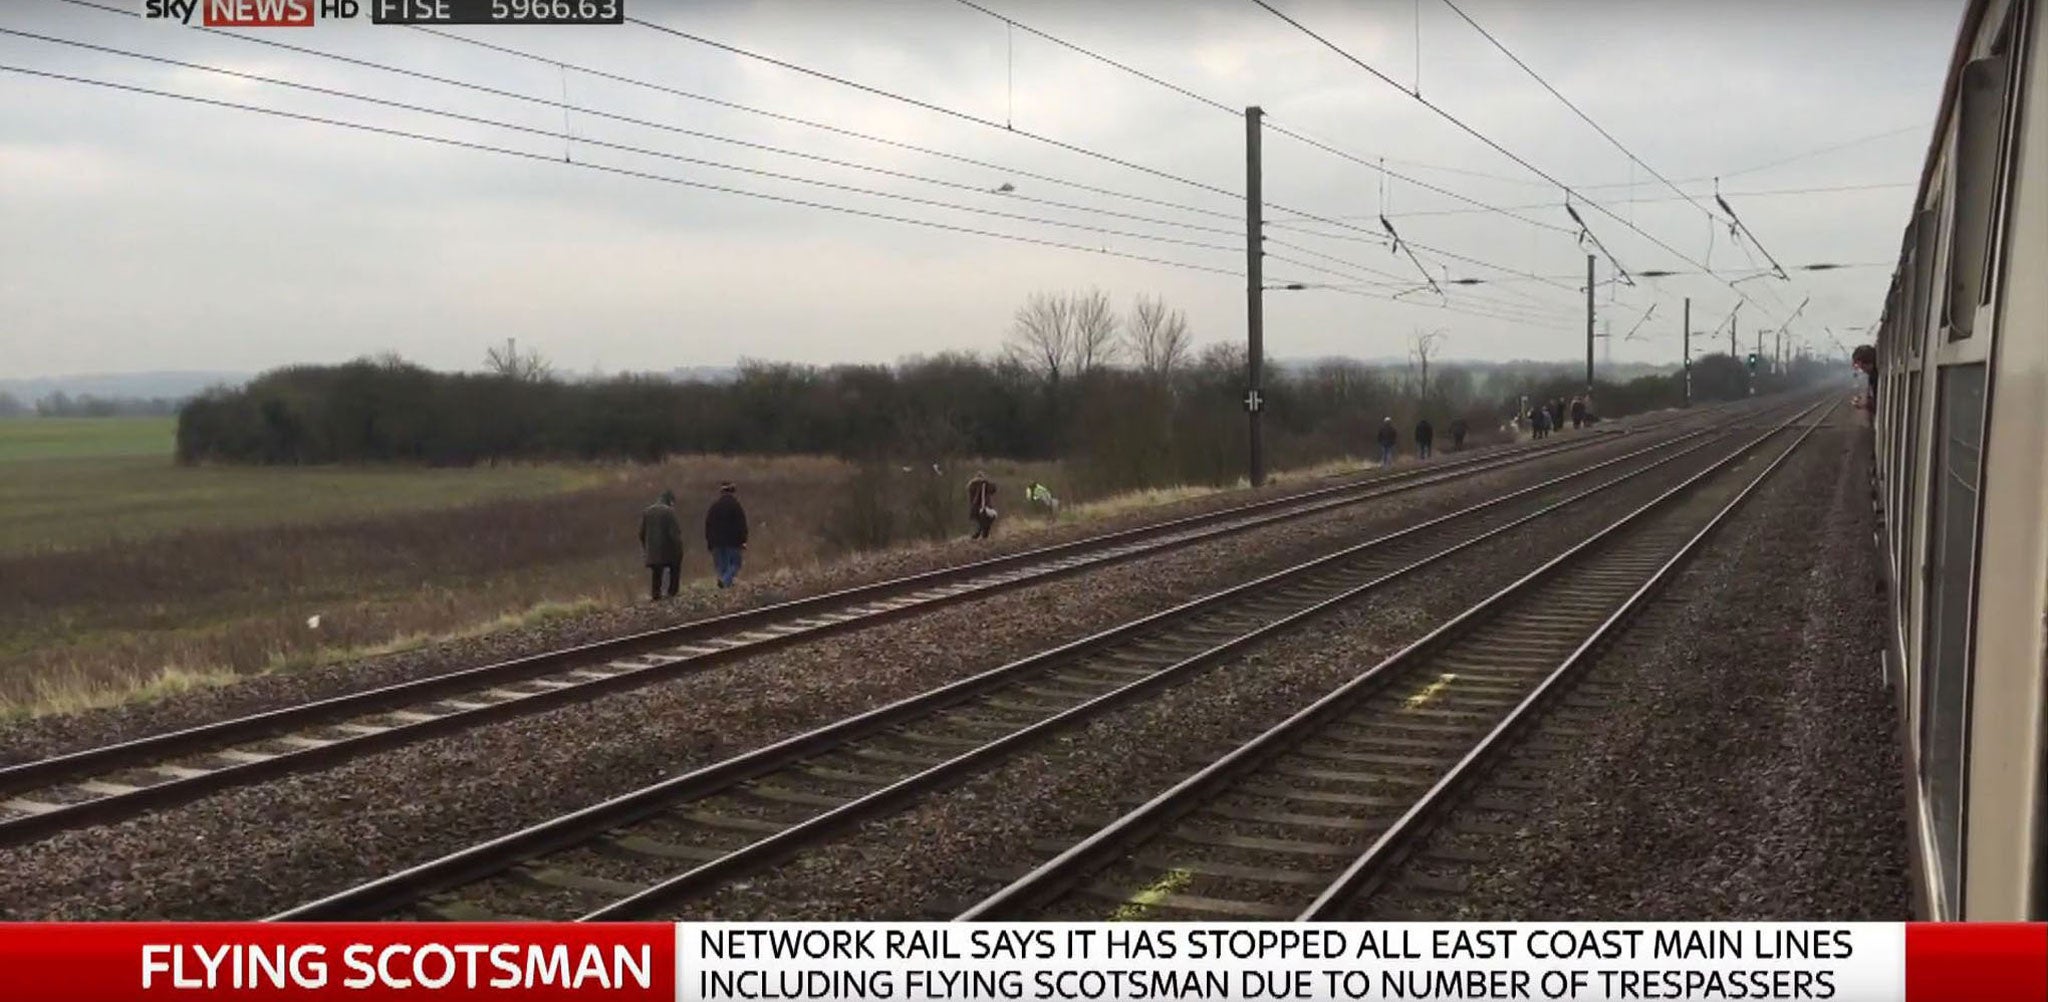 Footage filmed from the train showed people walking down the line